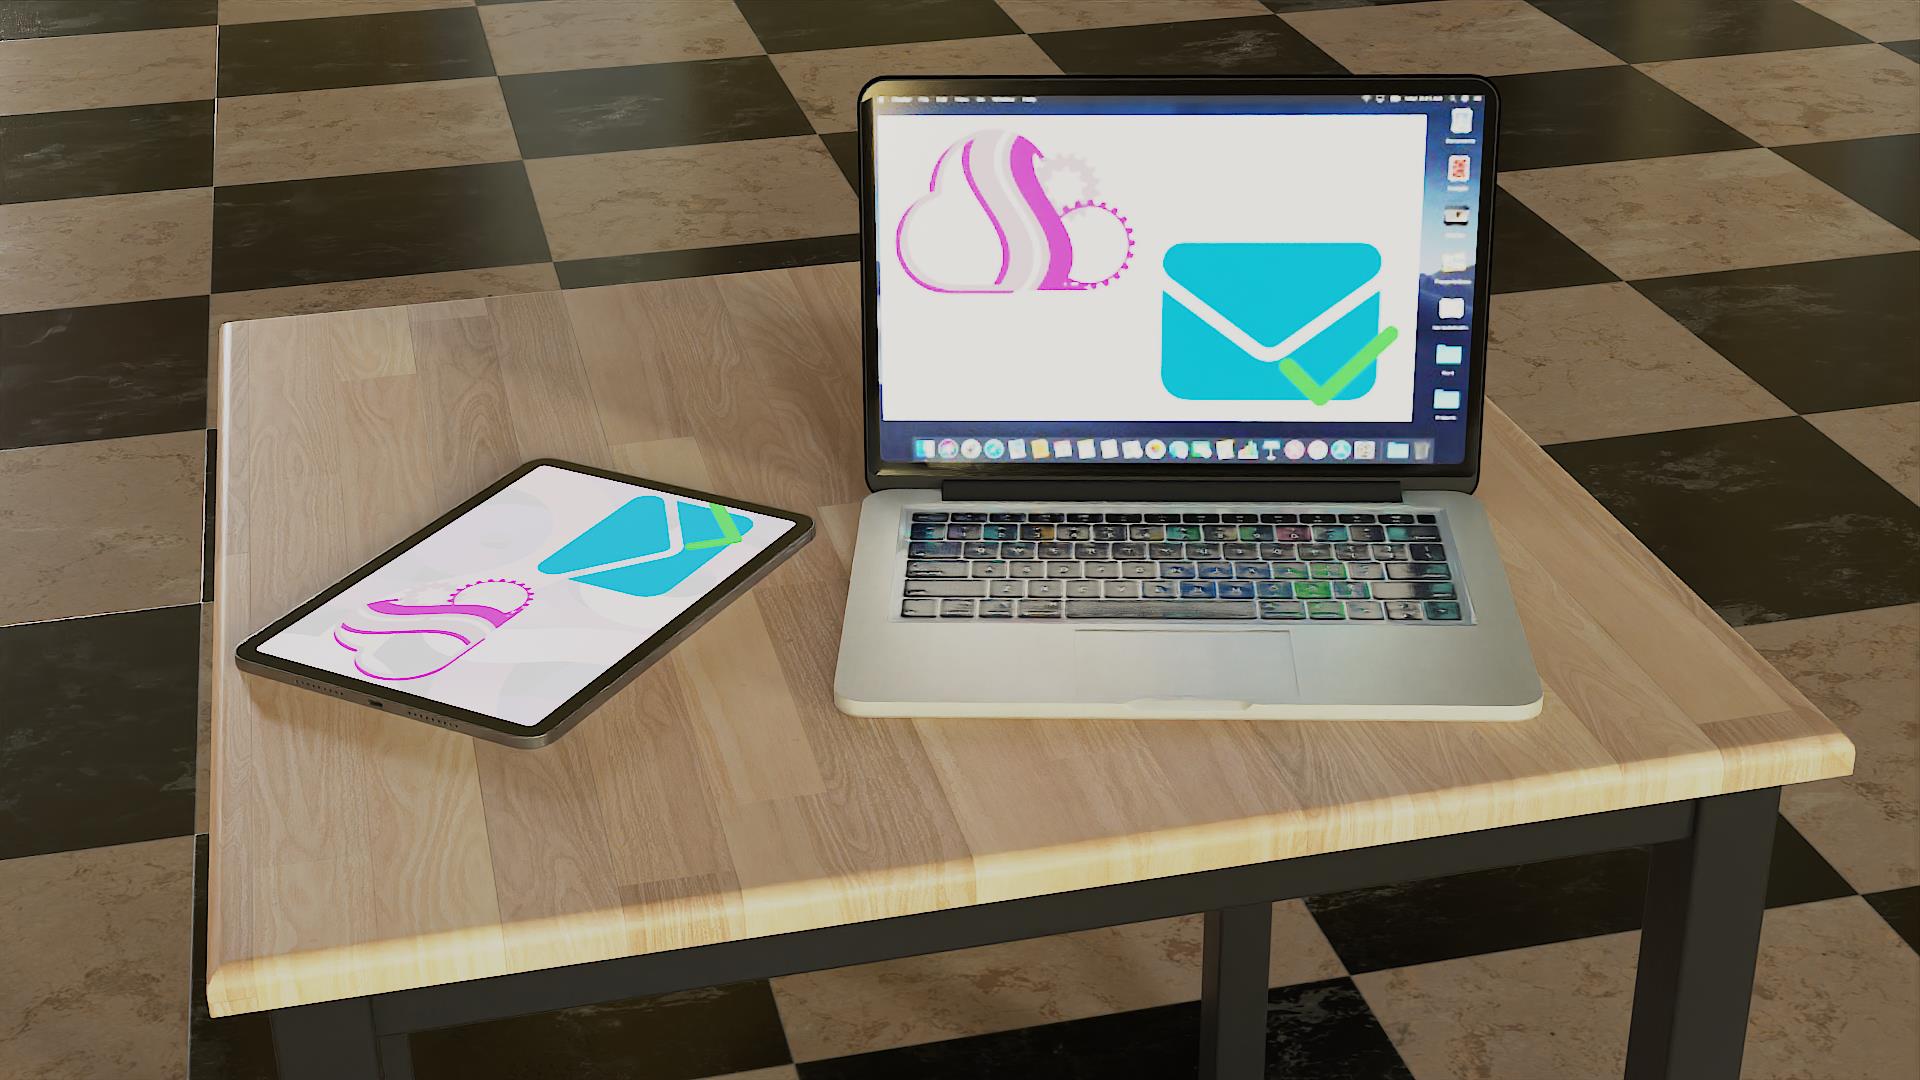 3D image of laptop and tablet